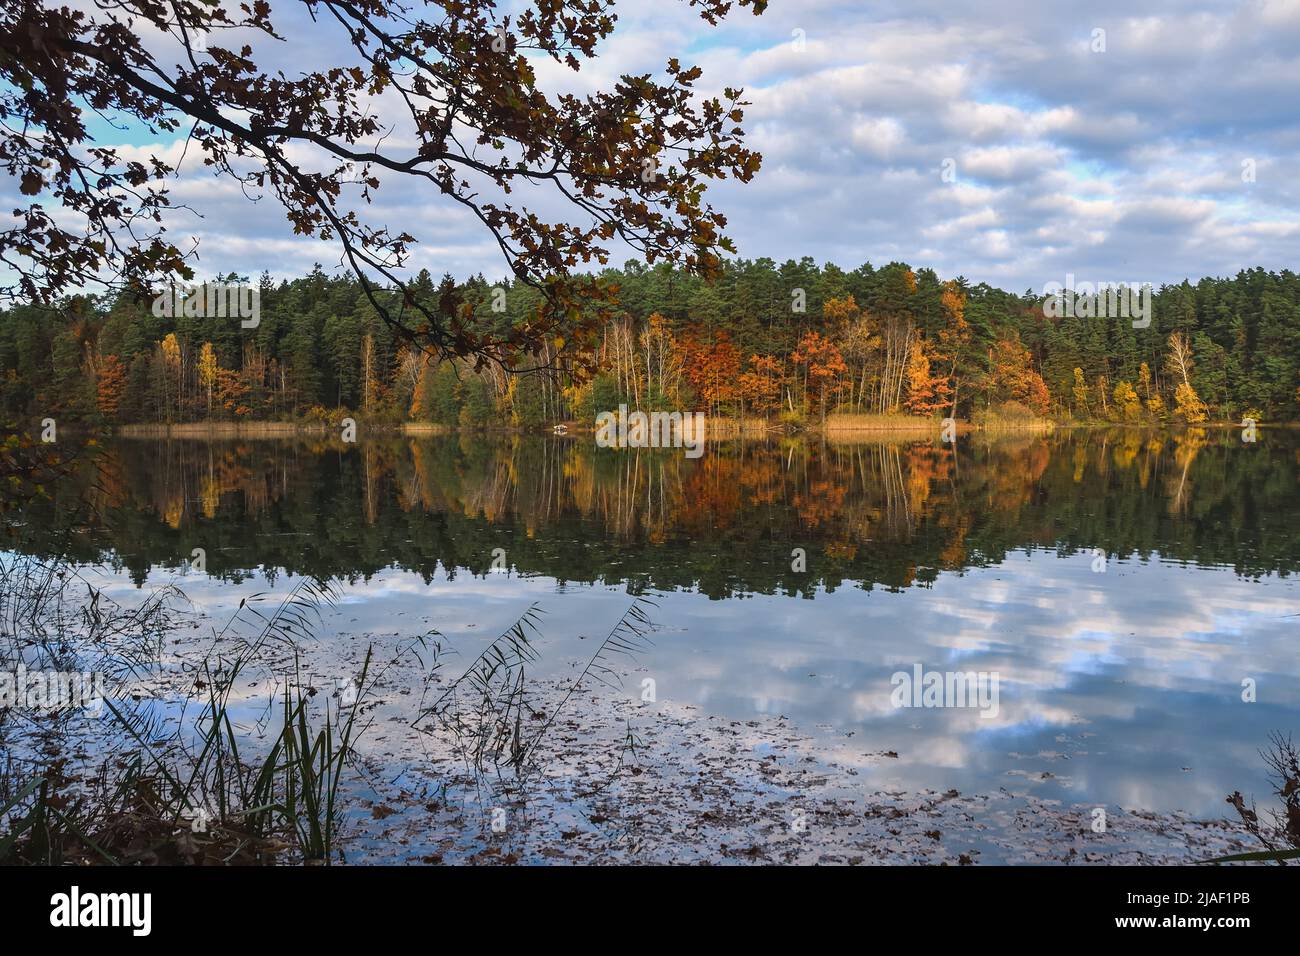 Autumn scene by the water. Colorful trees reflecting in a beautiful pond. Stock Photo